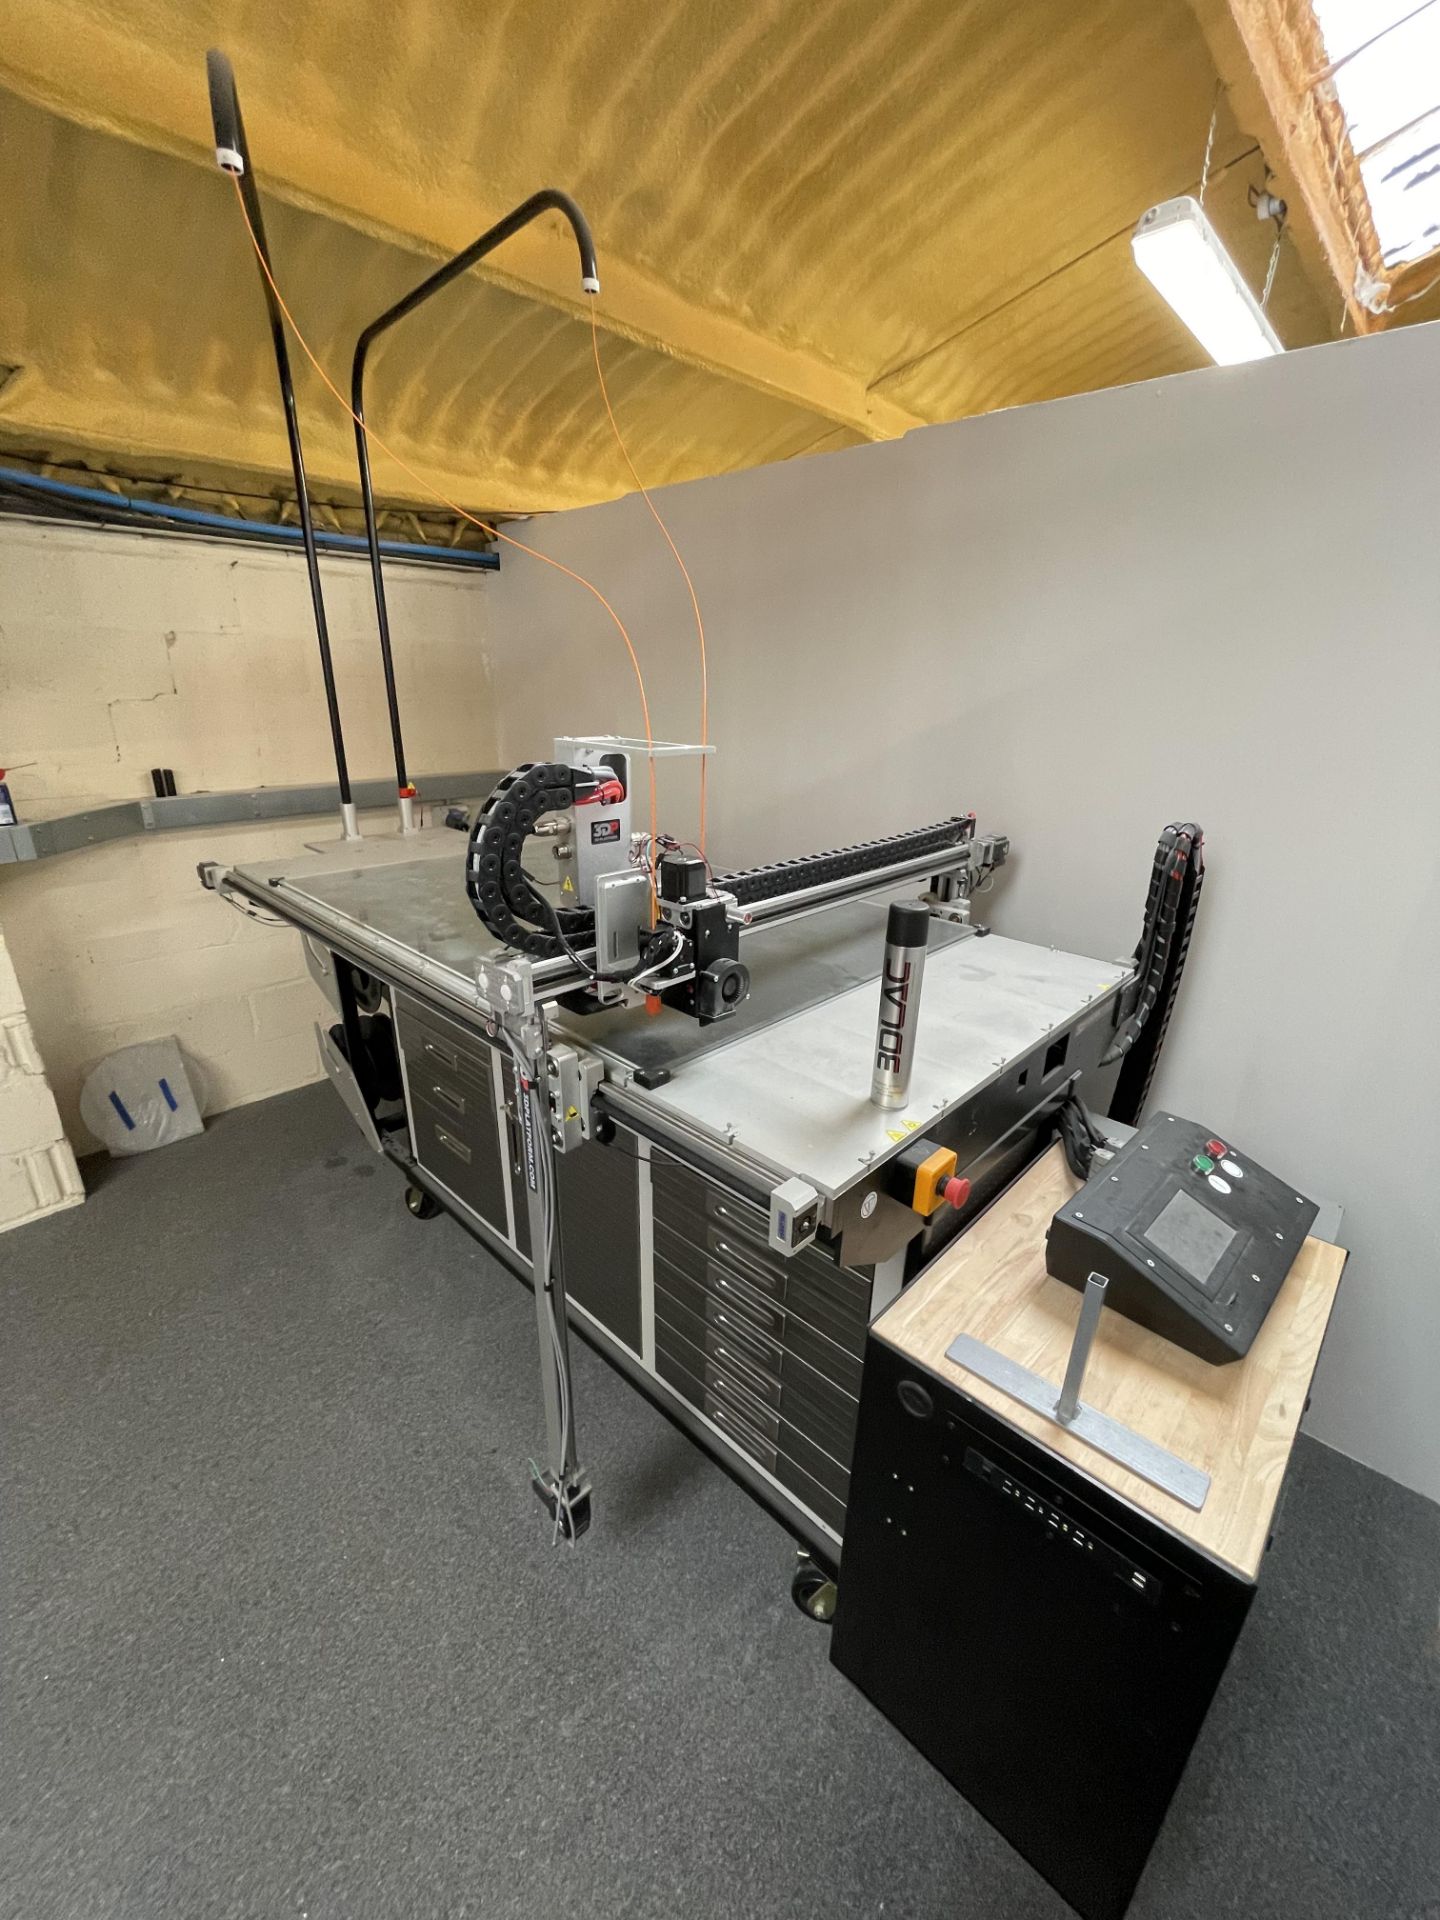 3D Platform 400 Xtreme Workseries 3D Printer S/No. WB959 with Seville Classics Undercupboards S/ - Image 12 of 14